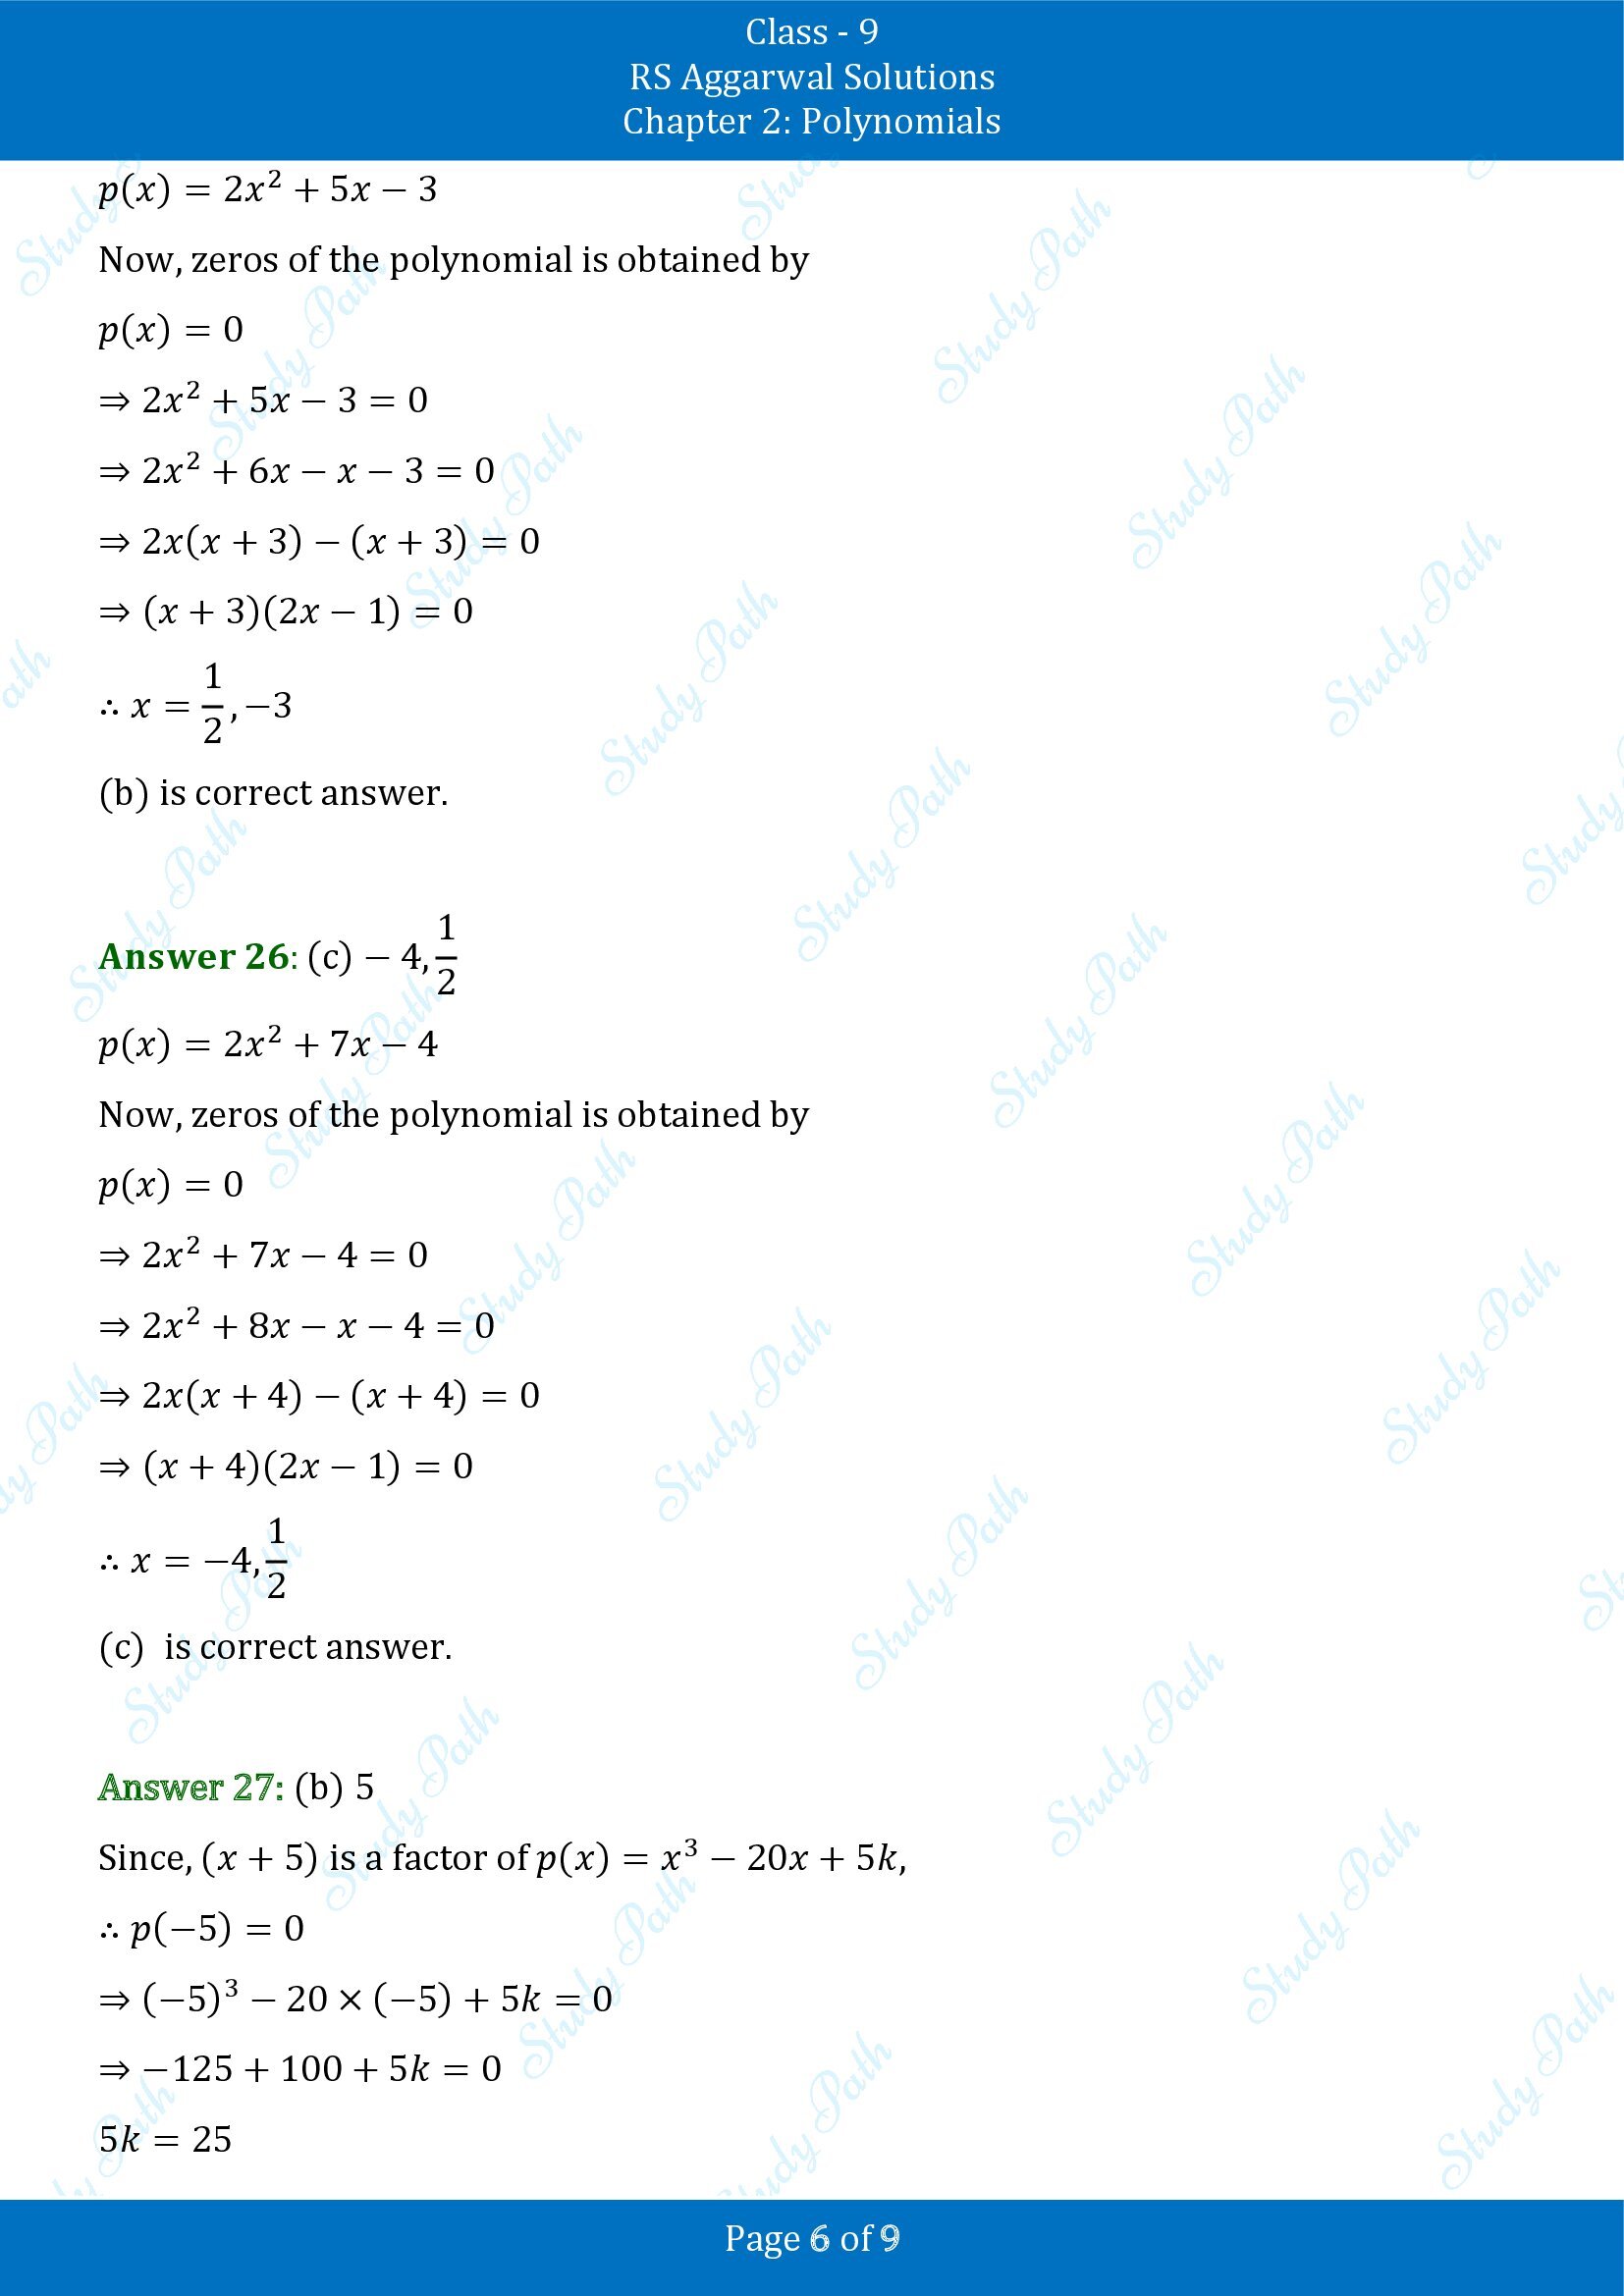 RS Aggarwal Solutions Class 9 Chapter 2 Polynomials Multiple Choice Questions MCQs 00006